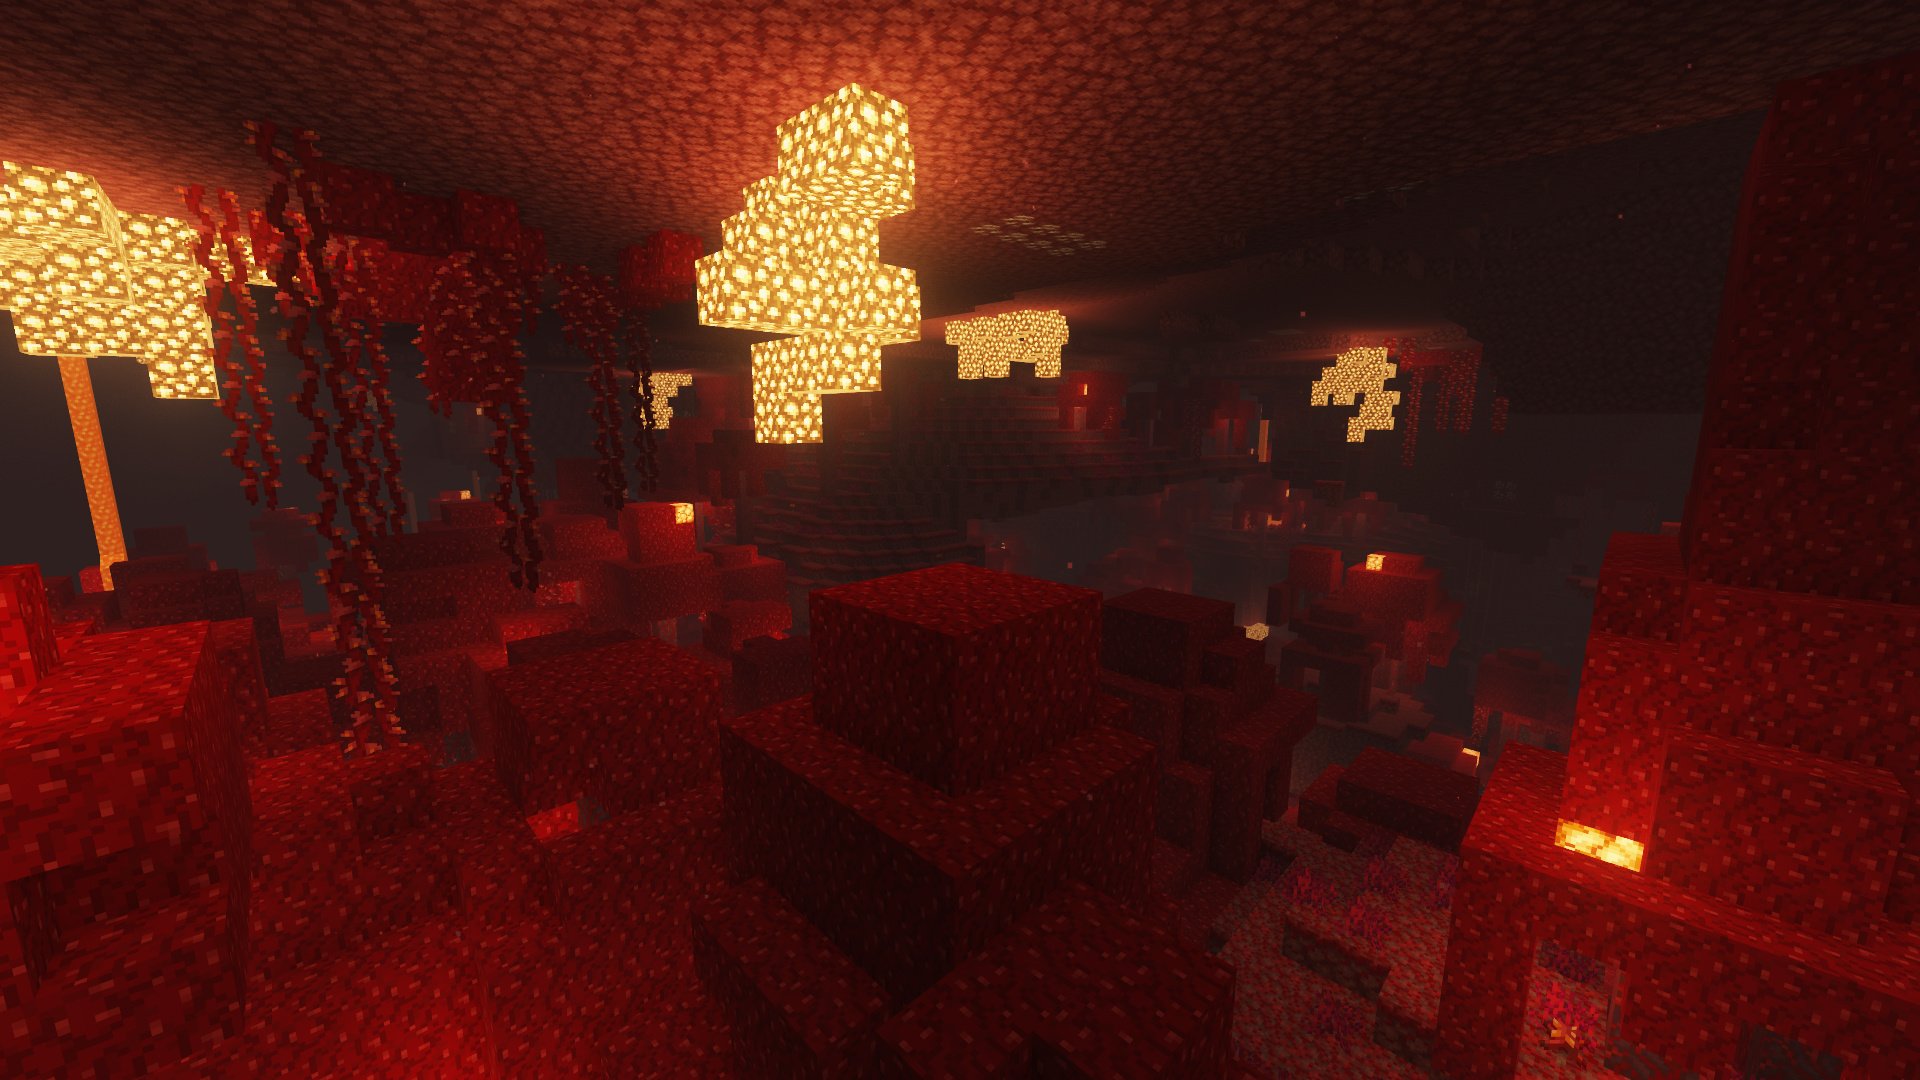 Nether forest